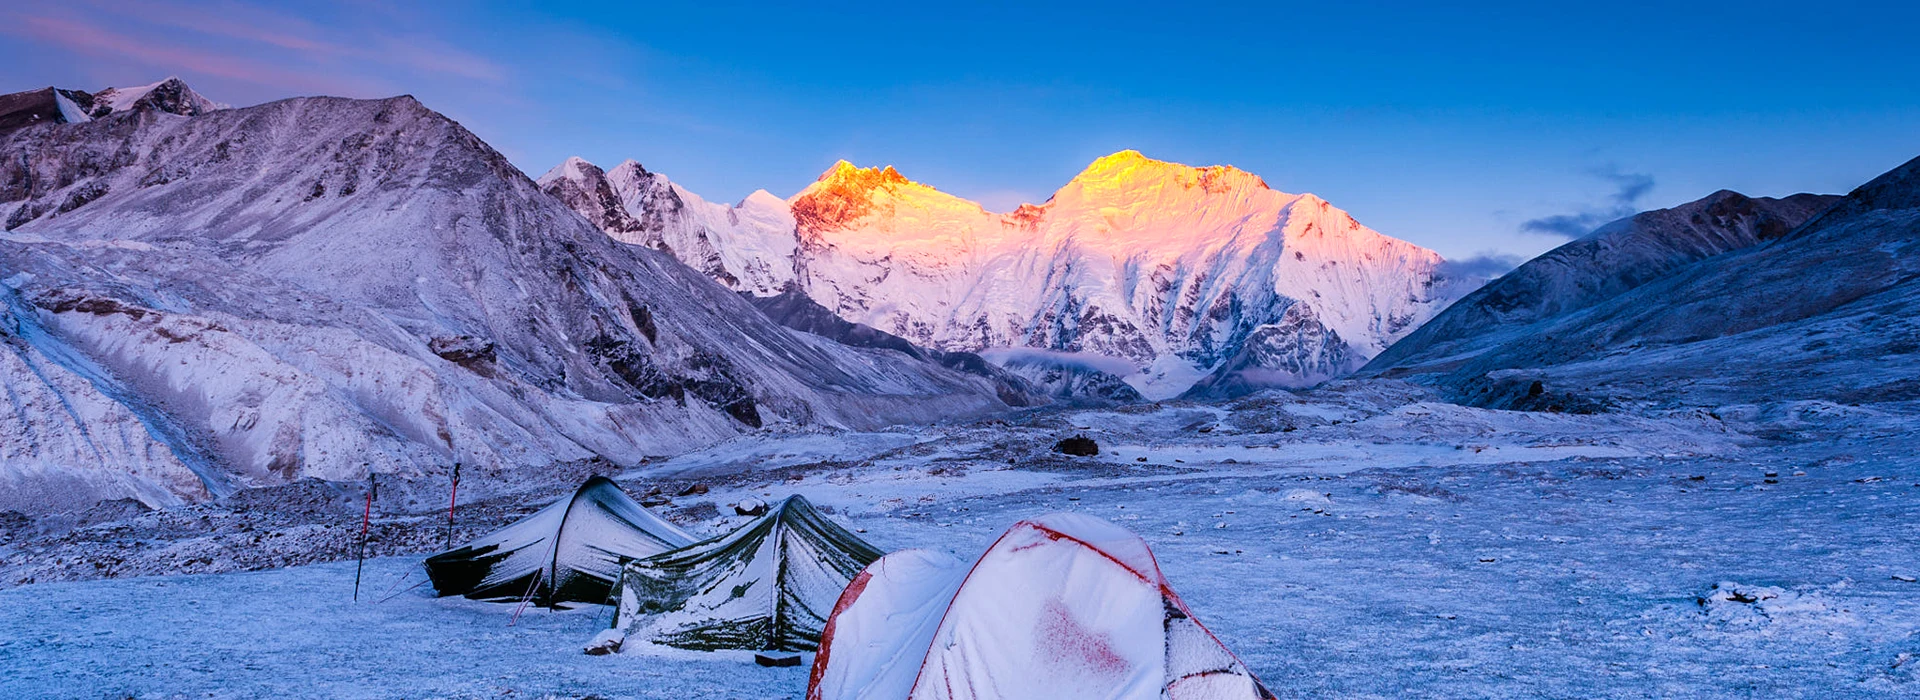 The continuous snowfall halted the Everest climbers at the base camp